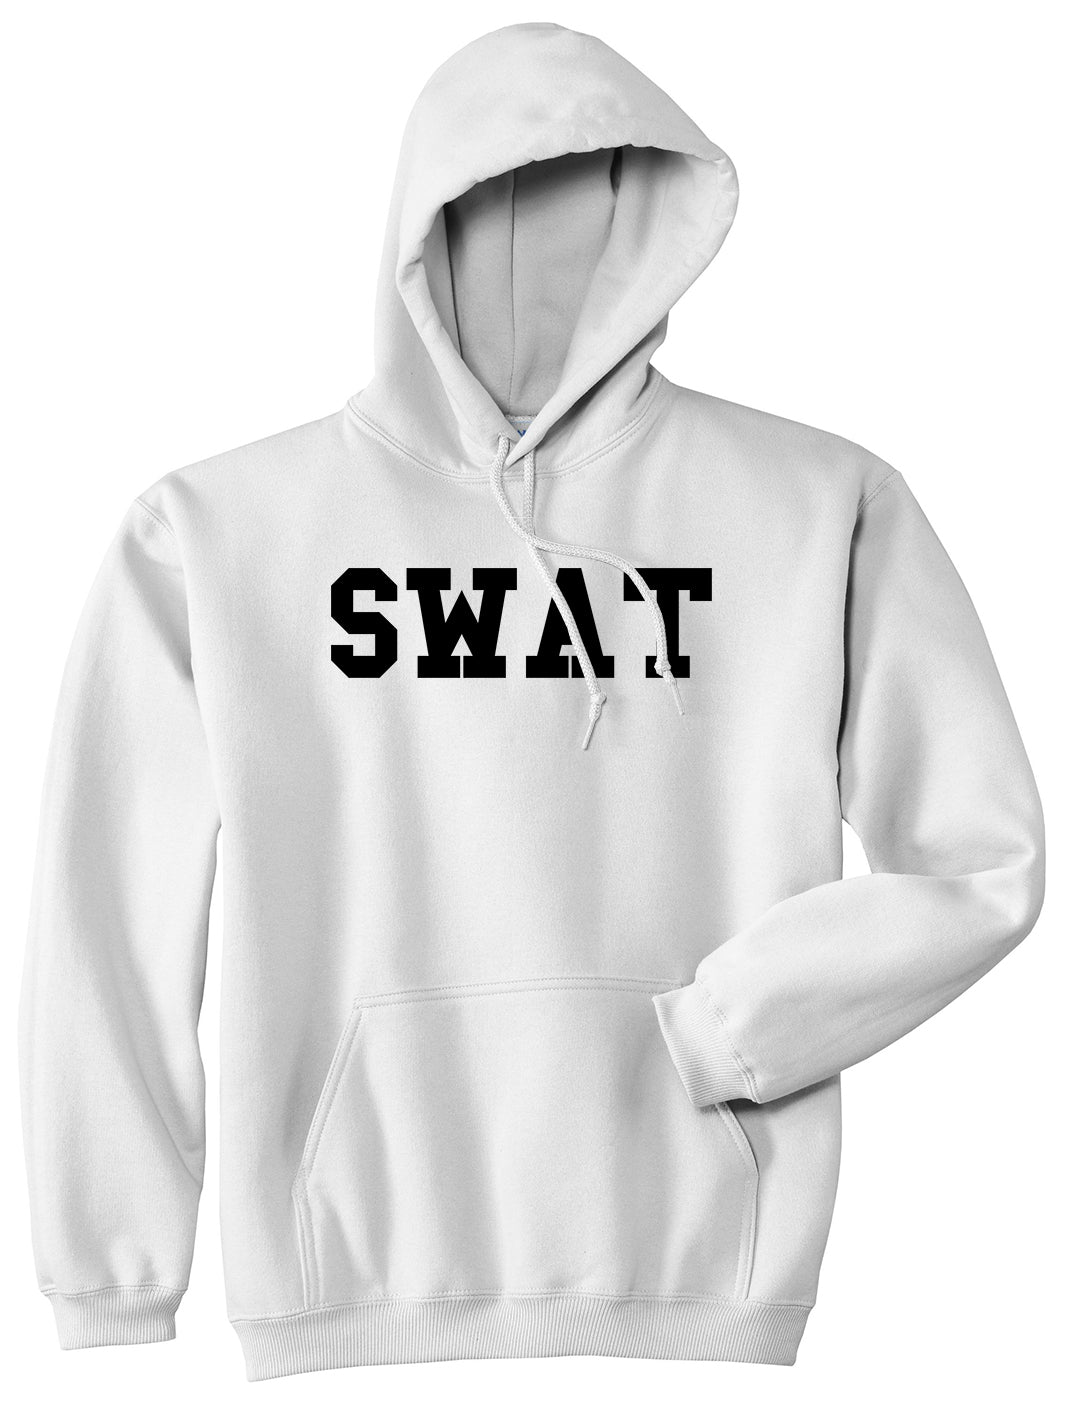 Swat Law Enforcement Mens White Pullover Hoodie by KINGS OF NY